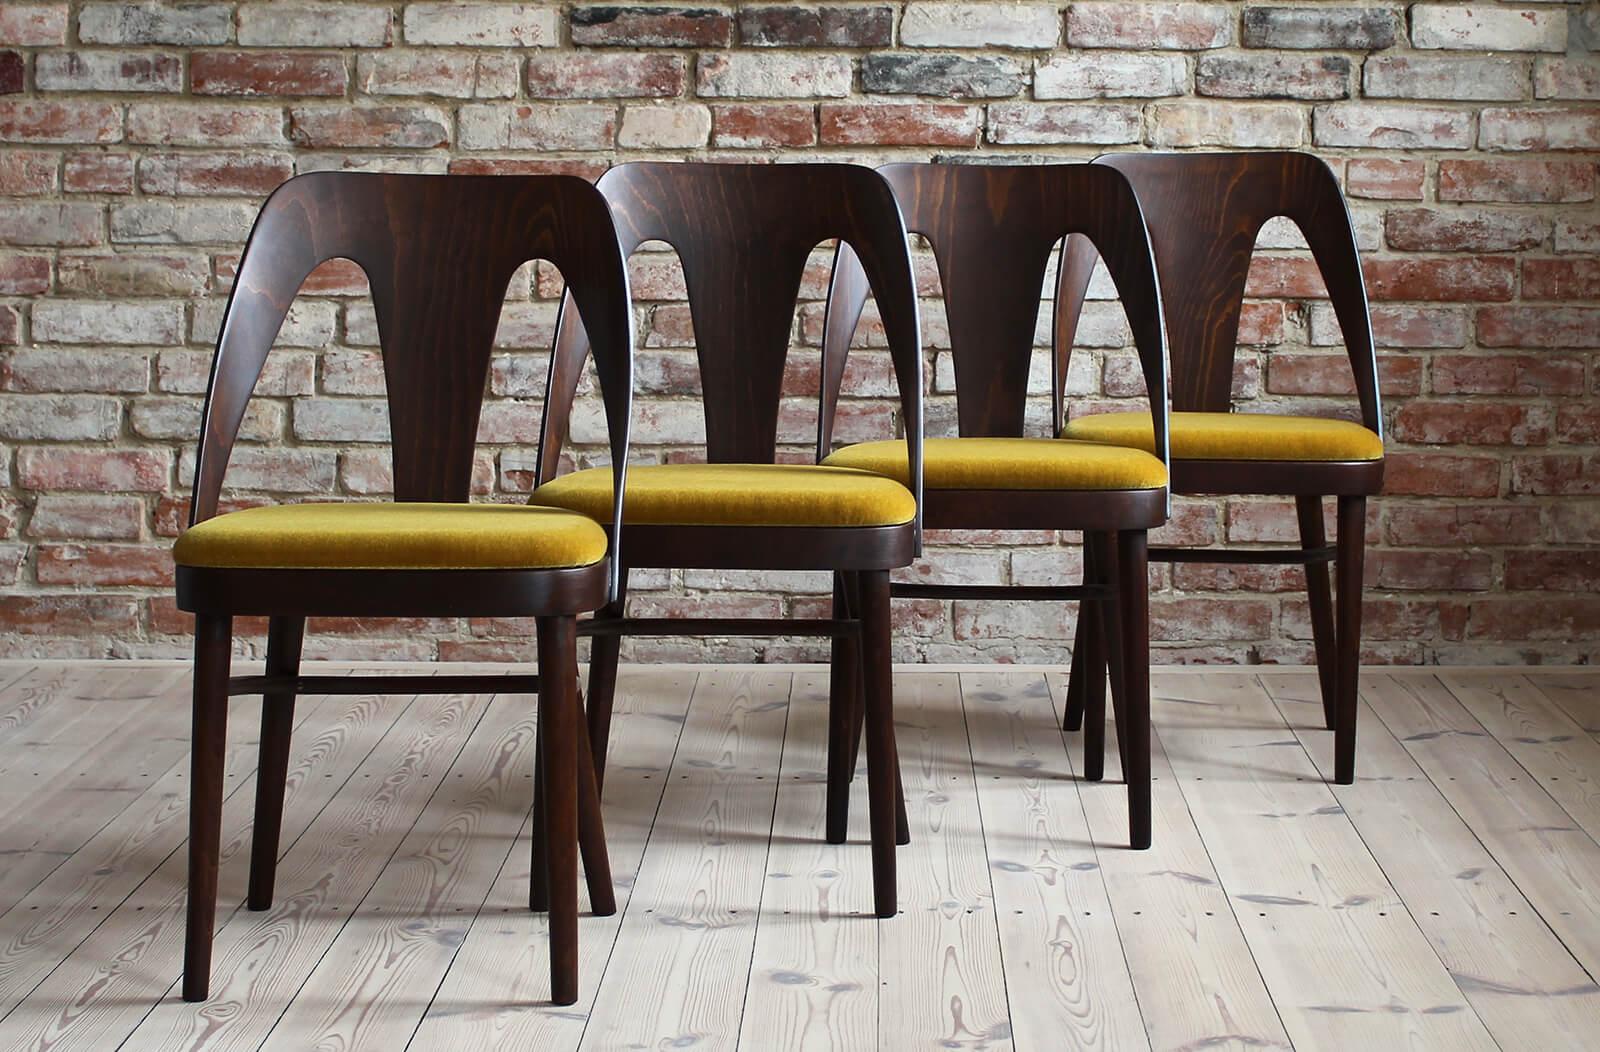 These chairs were produced in the 1950s in a well-known Bentwood Furniture Factory in Radomsko, Poland. Out of the many models that were made in Fameg back in those days, the A6070 chairs stand out with a stabile construction and their extremely